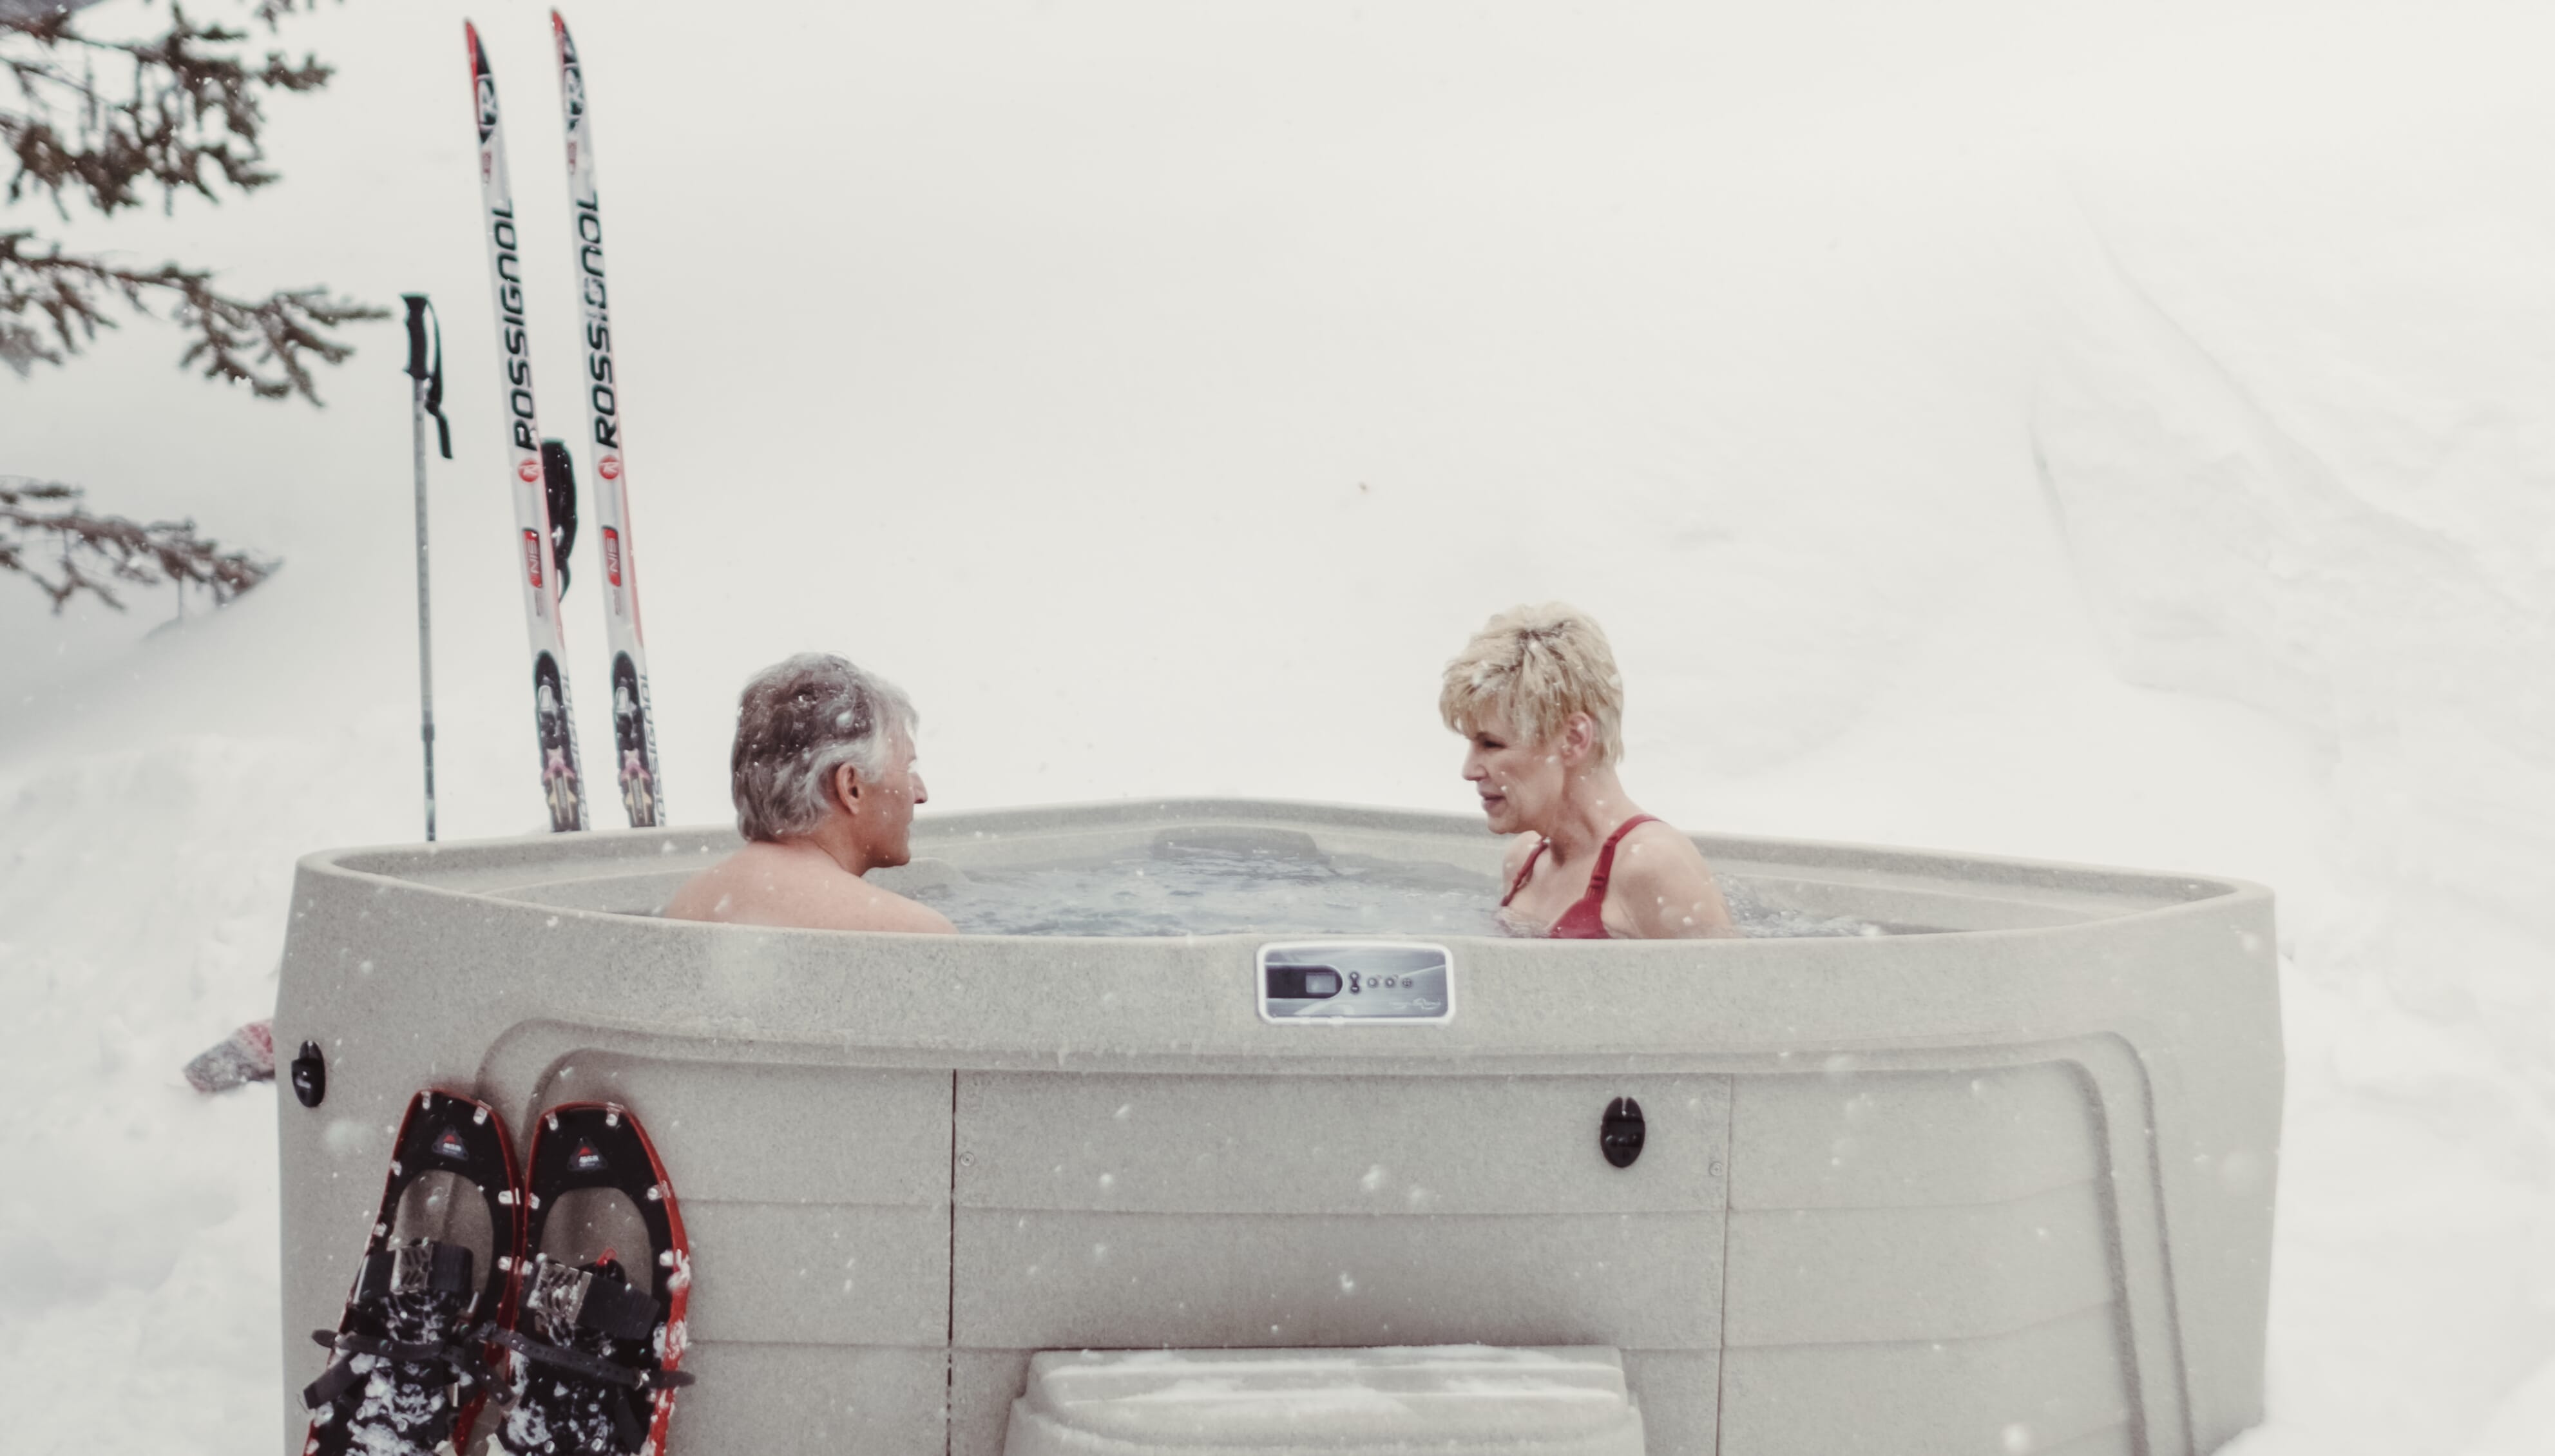 Bath and body perks: Here's why you should bathe with your friends this  winter